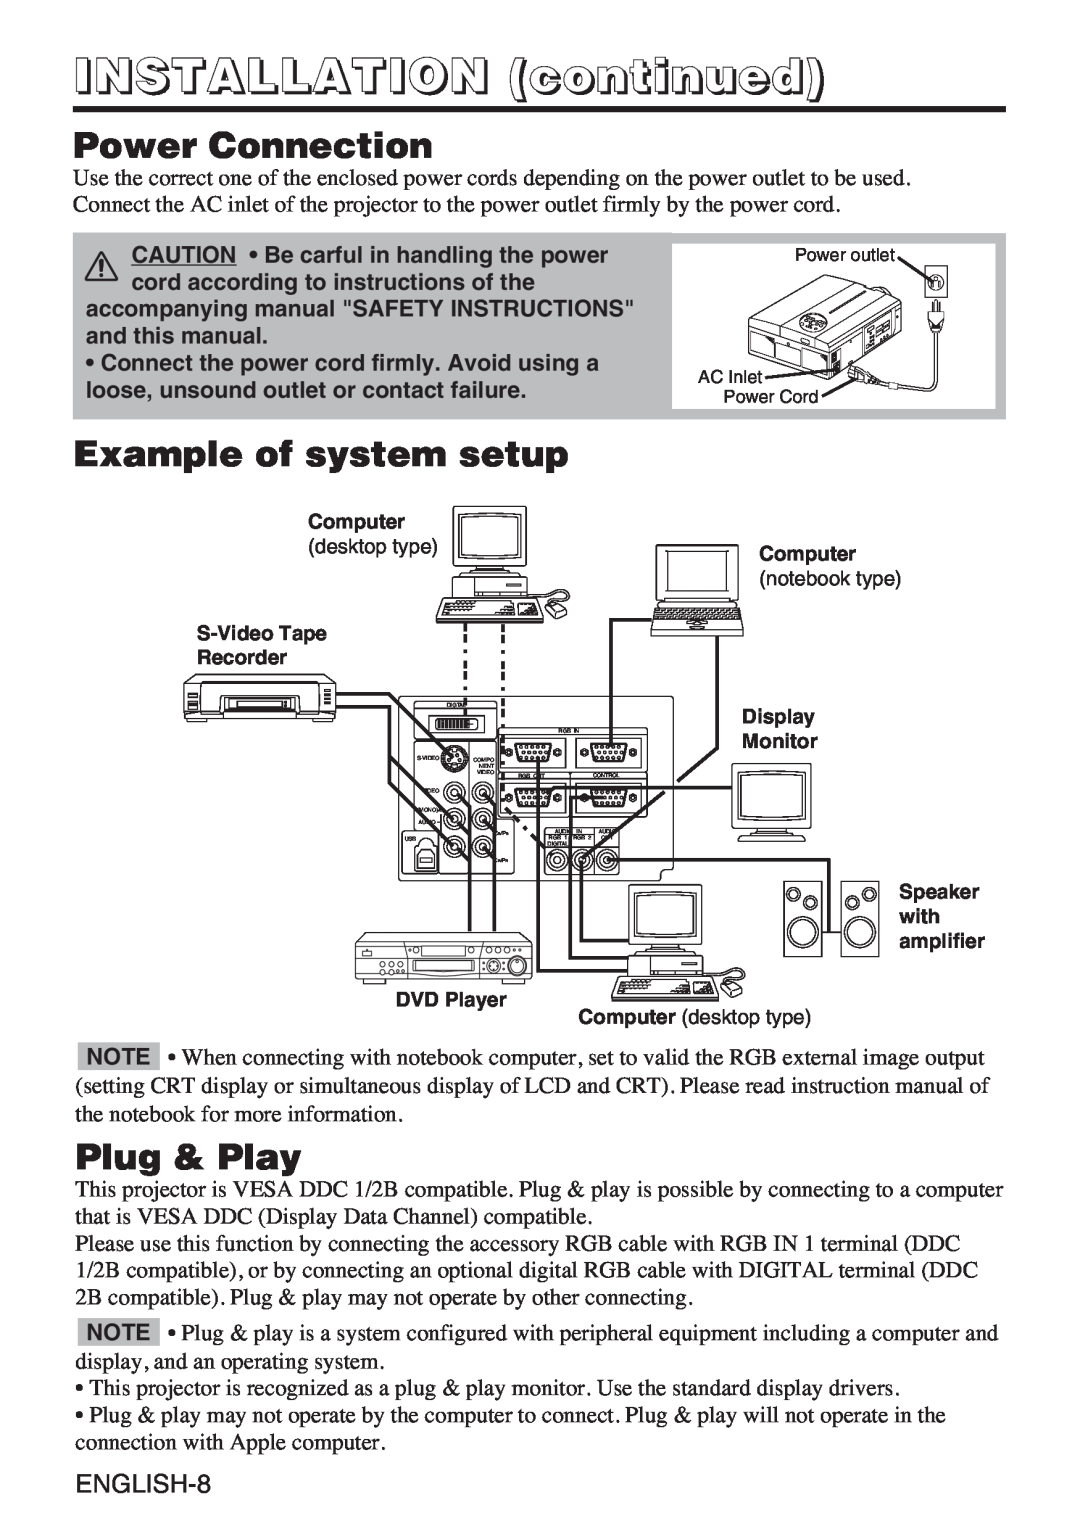 InFocus liquid crystal Power Connection, Example of system setup, Plug & Play, ENGLISH-8, INSTALLATION continued 